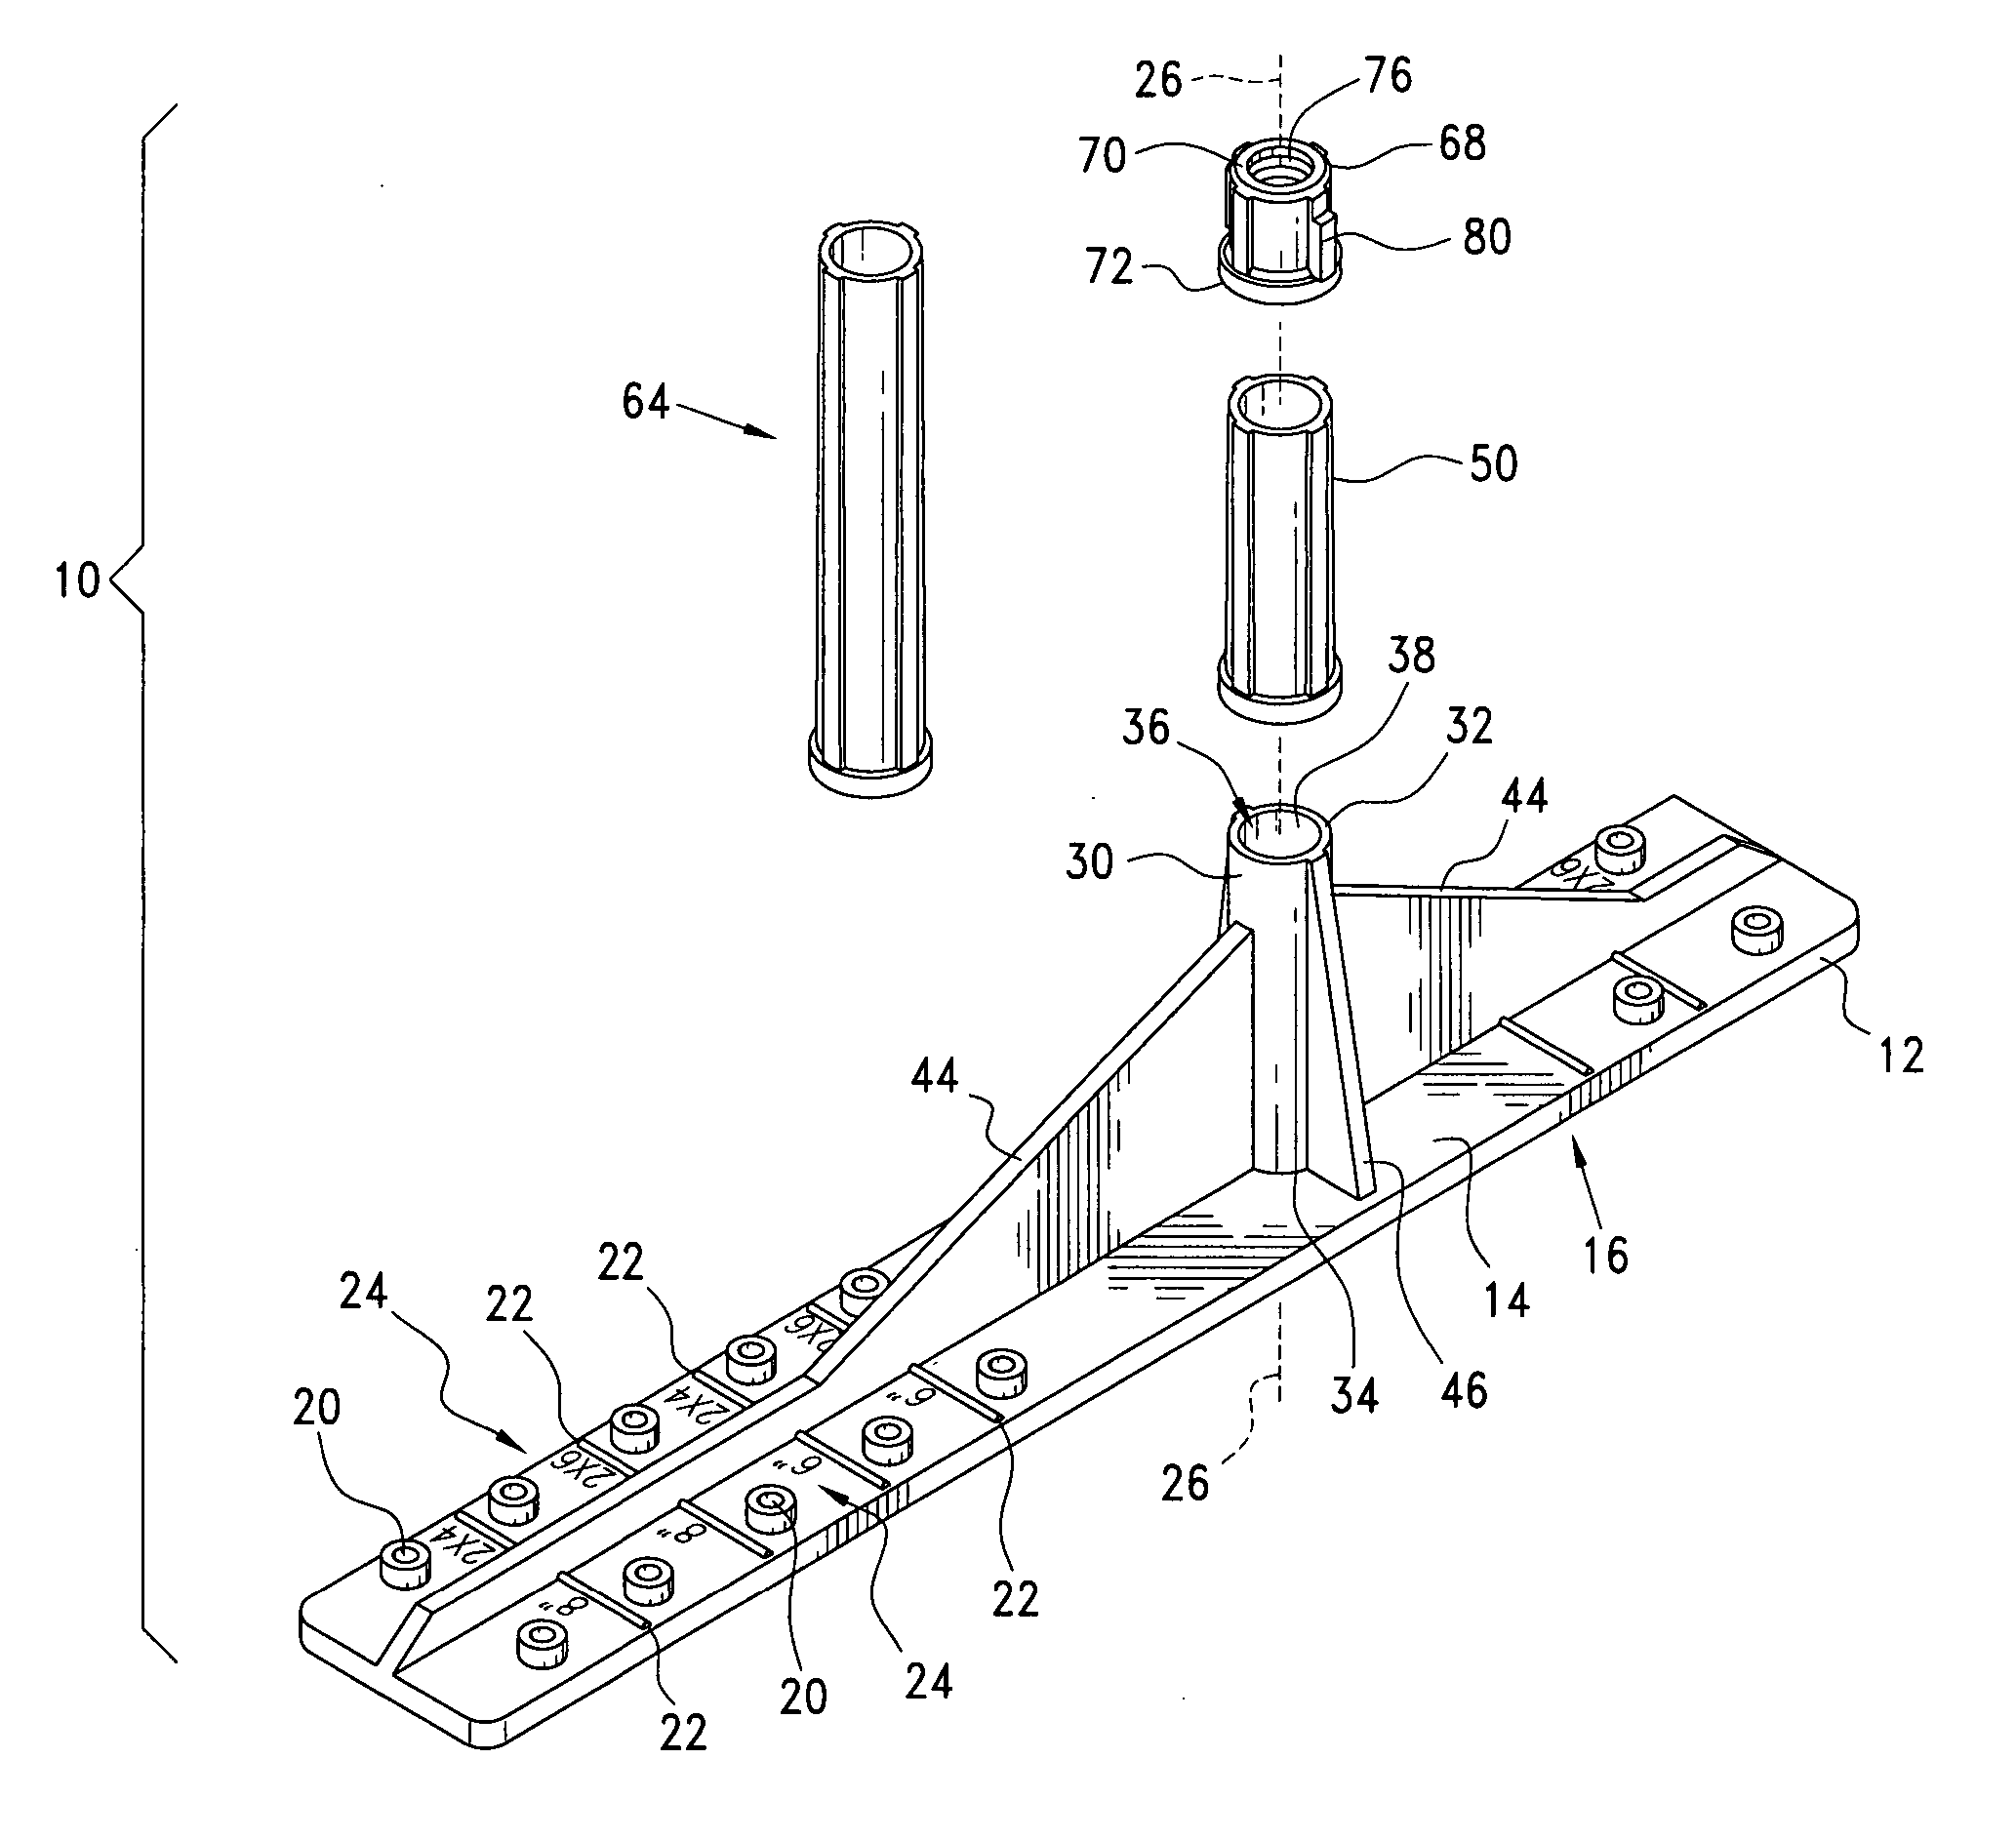 Anchor bolt placement protection assembly and method for aligning structural elements in a form when pouring concrete